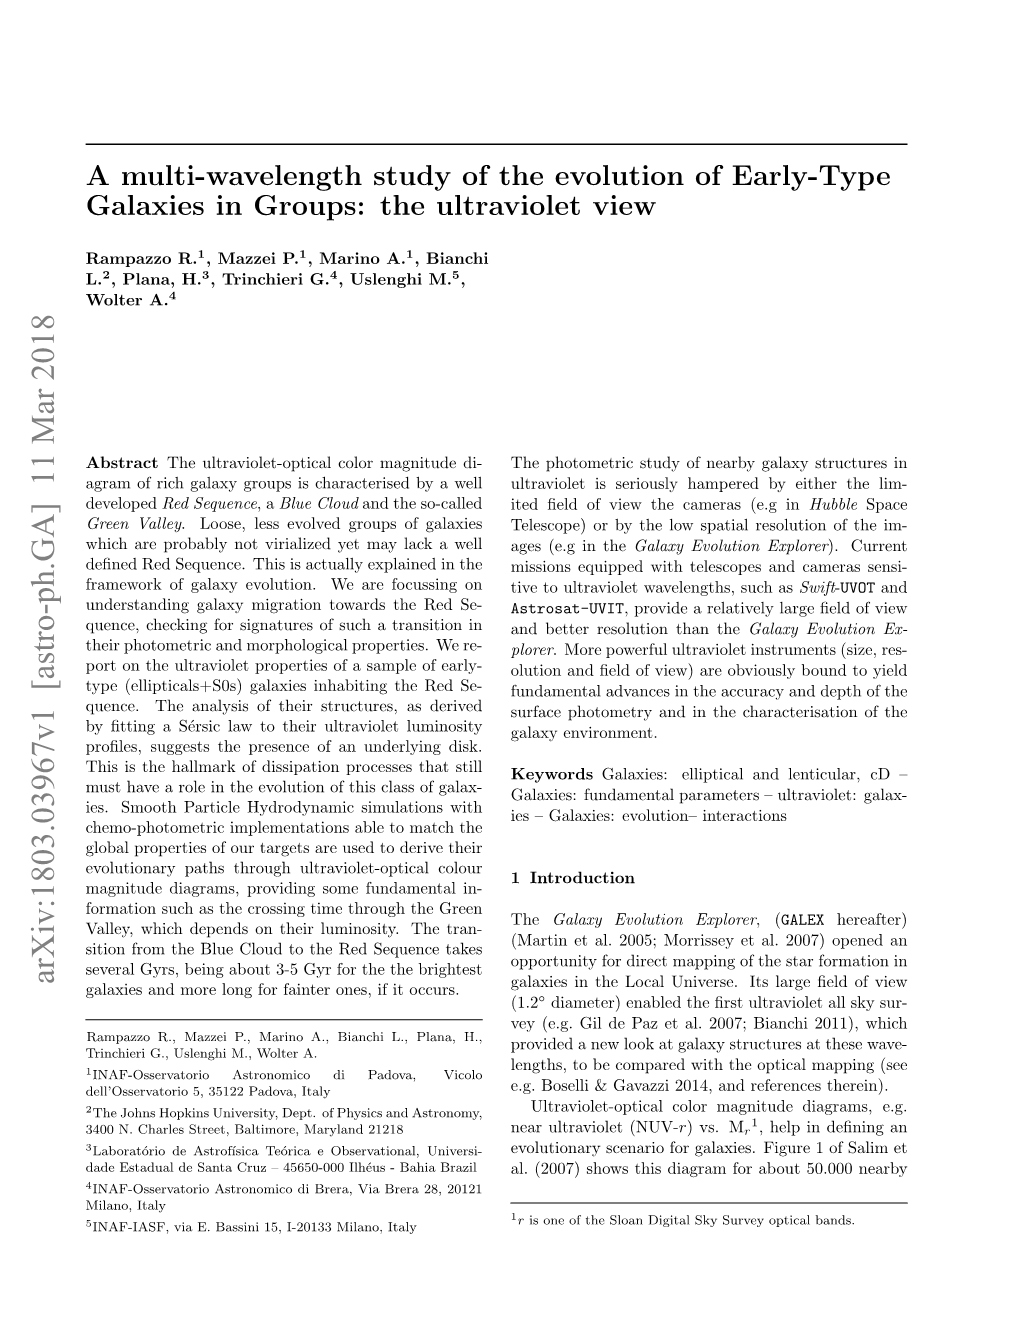 A Multi-Wavelength Study of the Evolution of Early-Type Galaxies in Groups: the Ultraviolet View